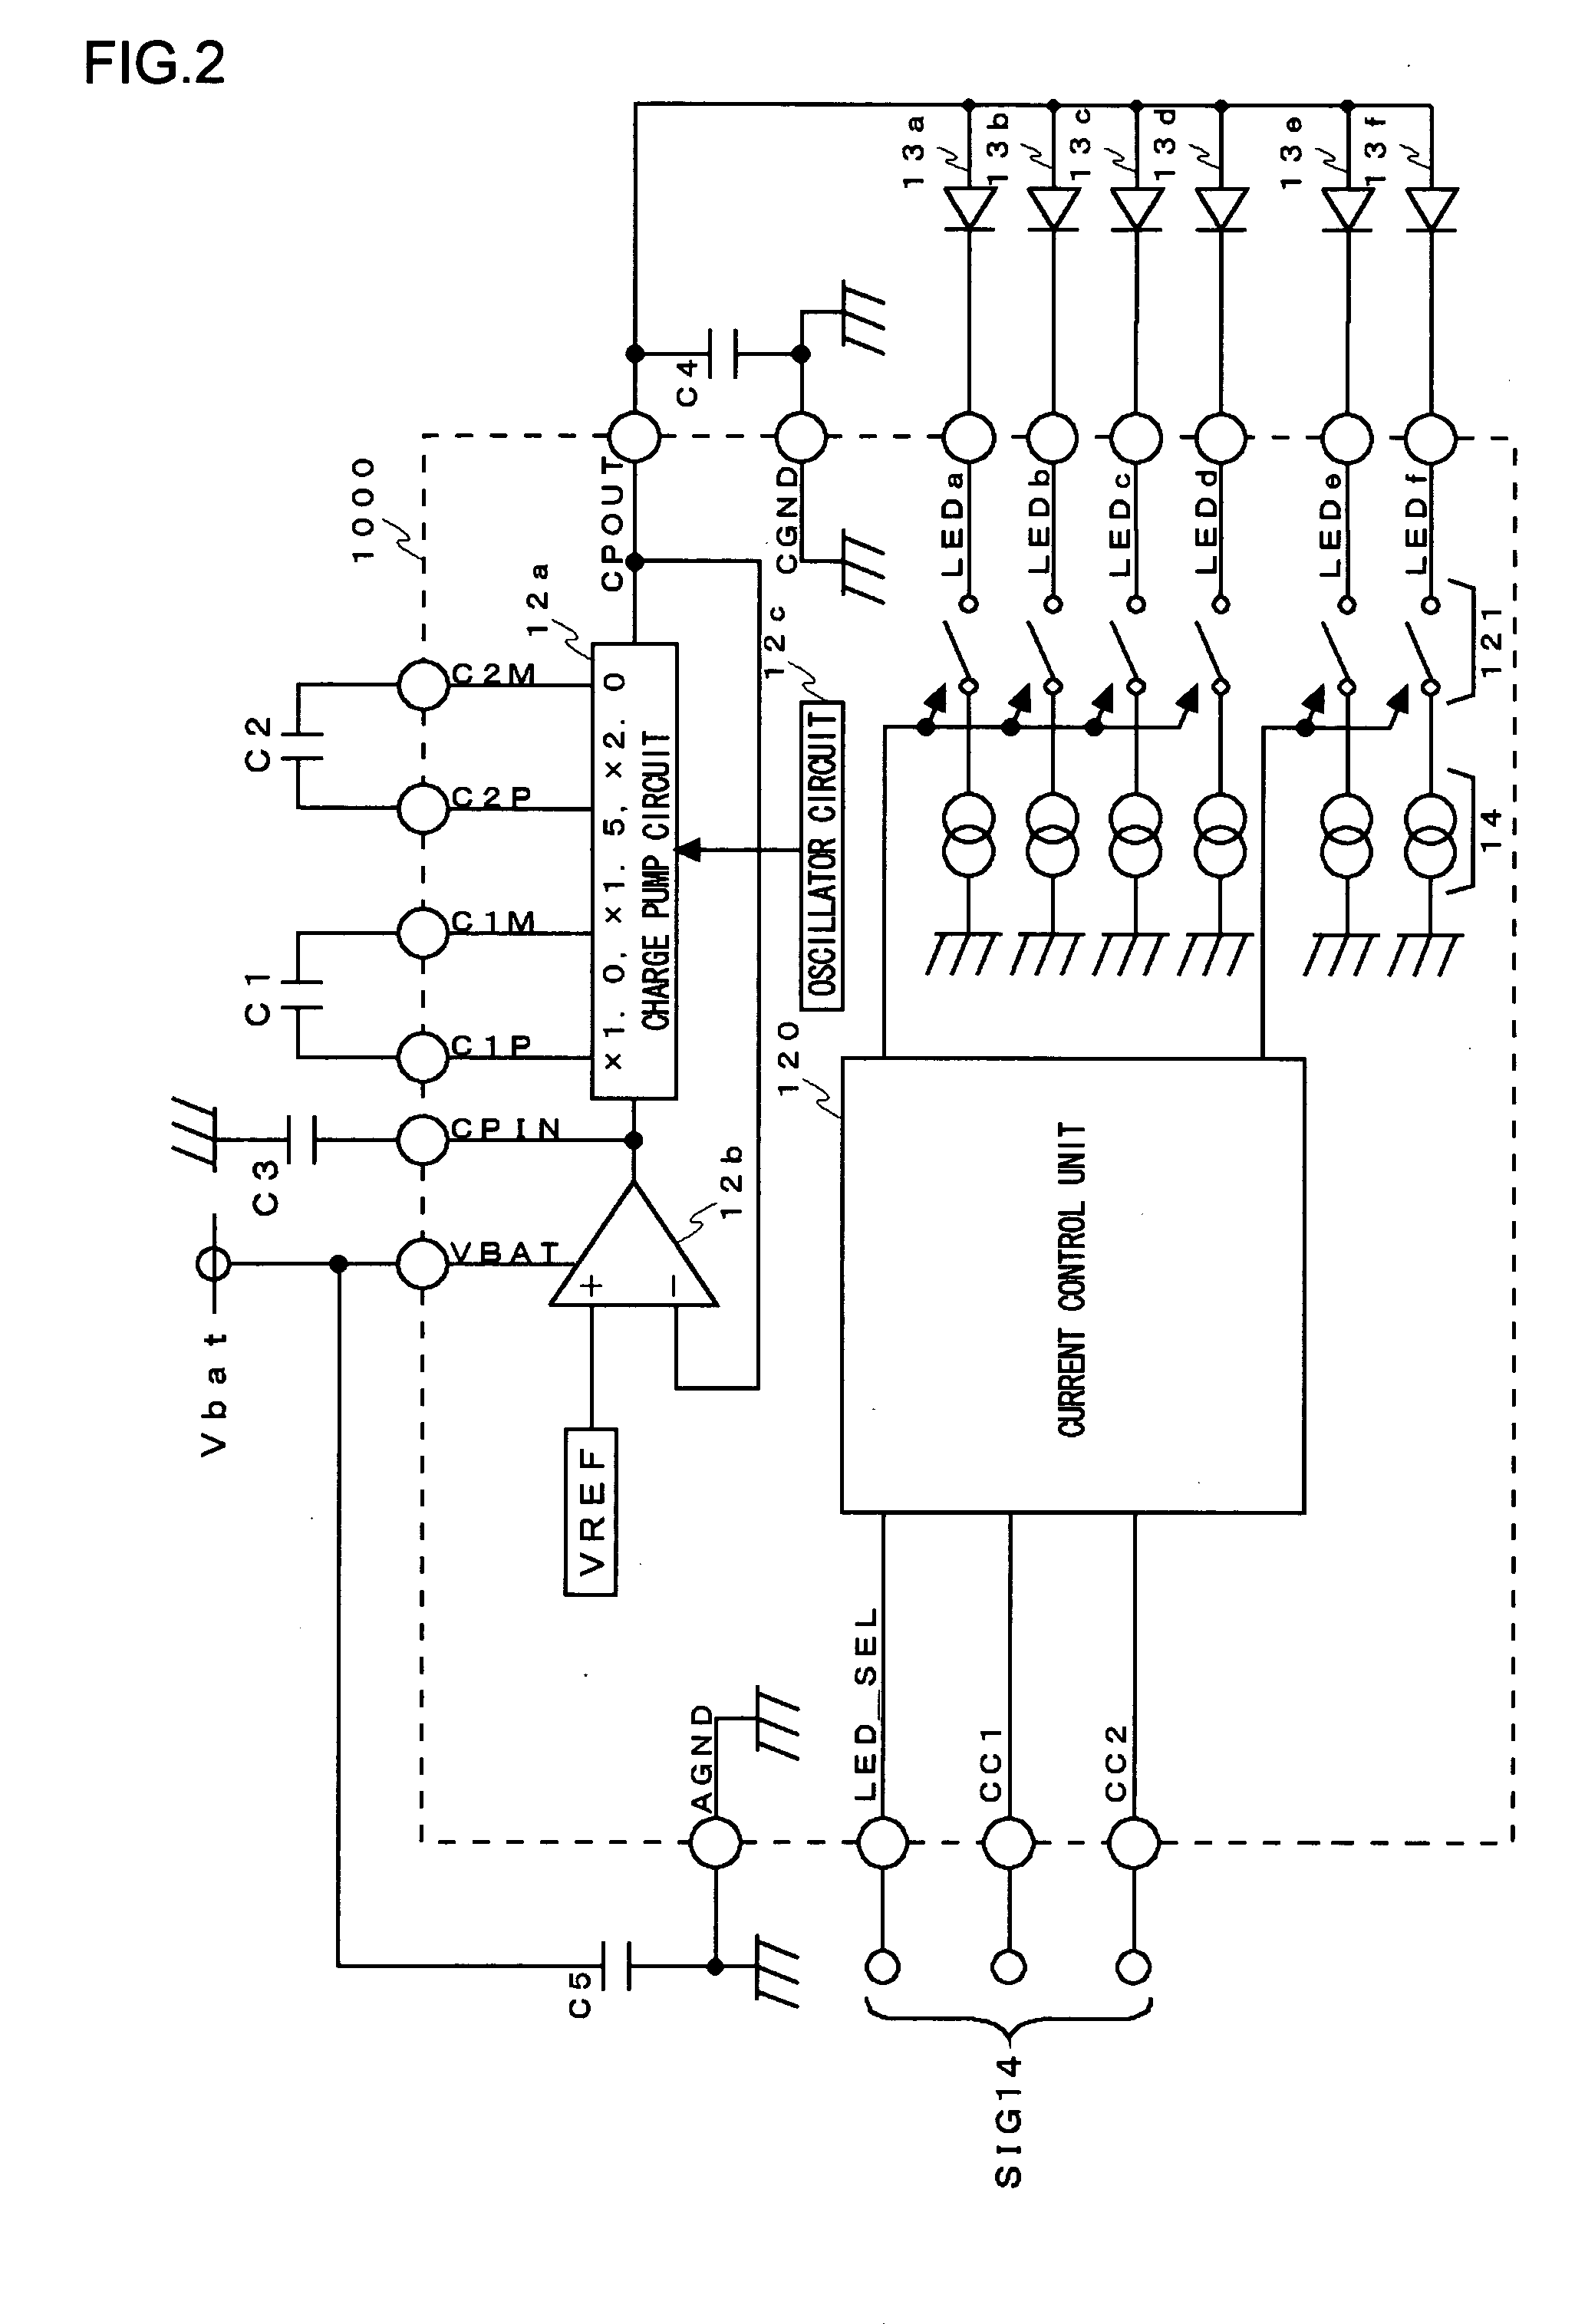 Boost controller capable of step-up ratio control